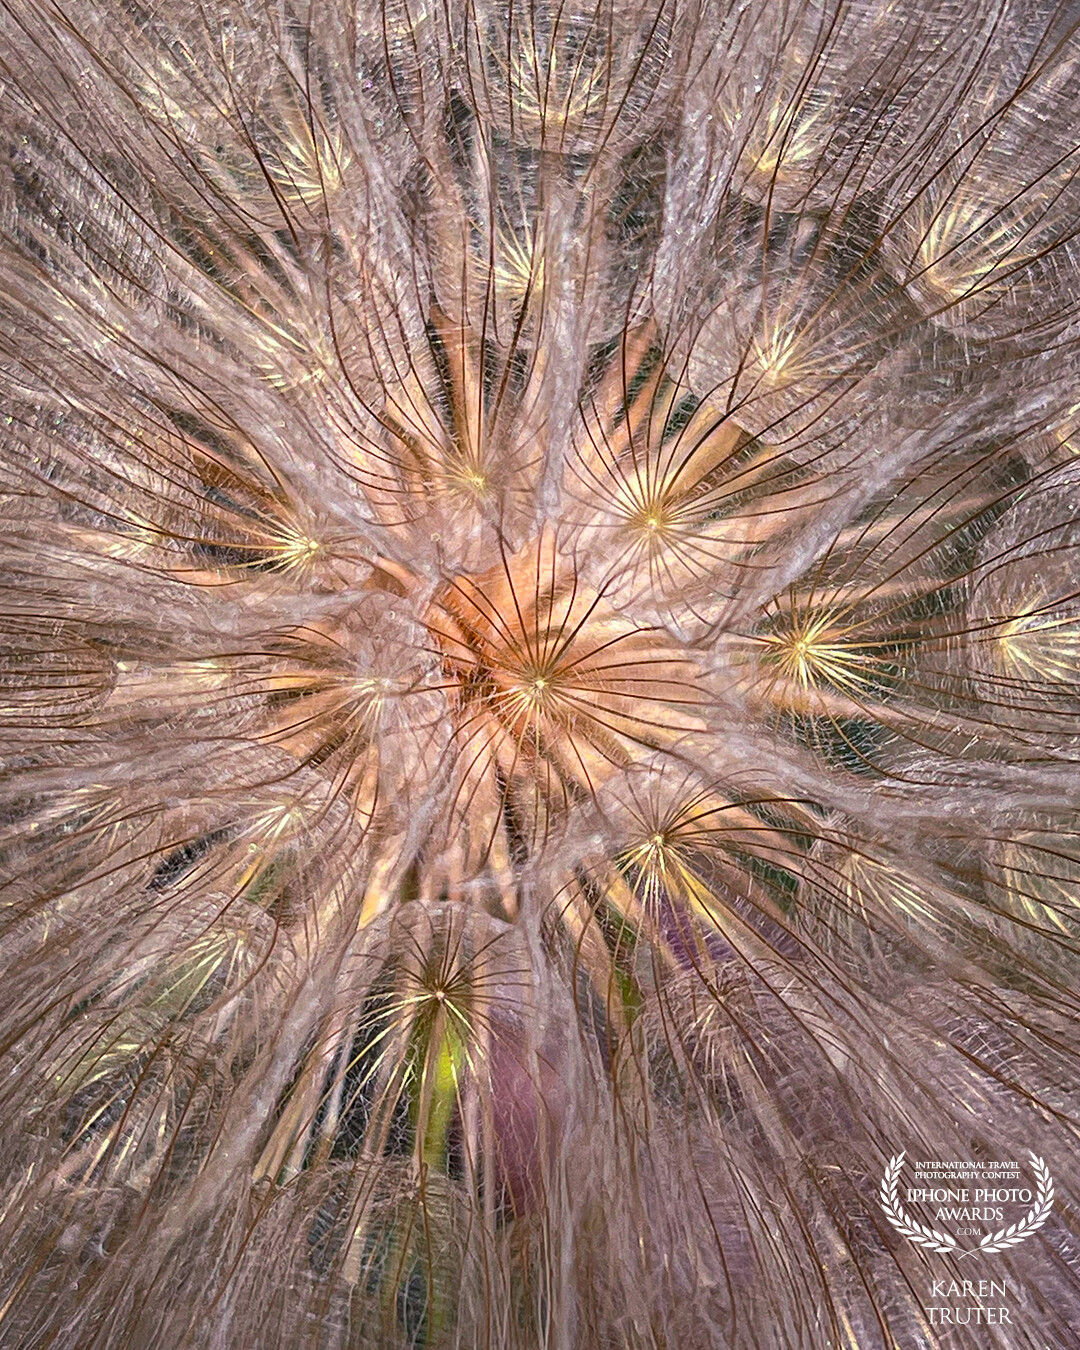 Inside a salsify seed head, often mistaken for a dandelion. The sunlight glistened on the fine hairs of its complex woven orb. I used the 2.5x lens of iPhone 12 Pro Max to capture the detail.